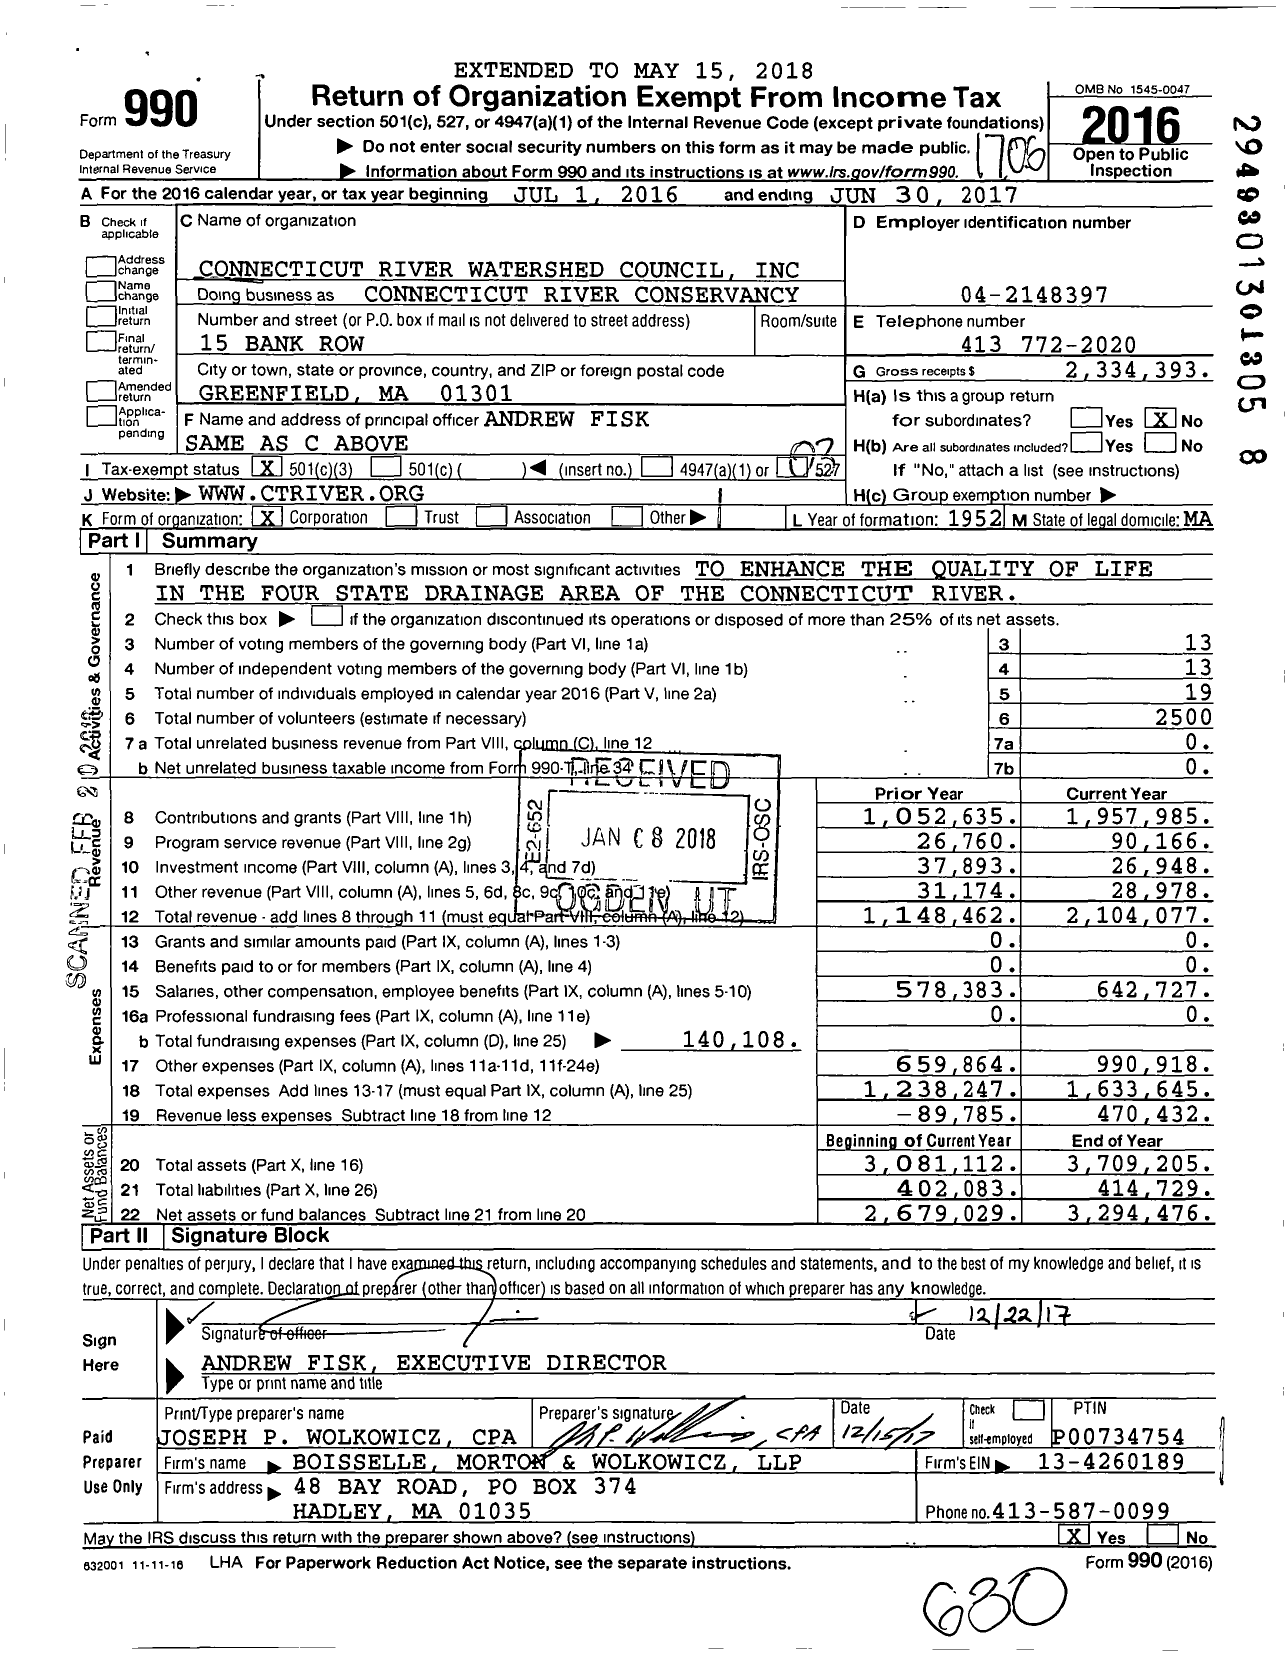 Image of first page of 2016 Form 990 for Connecticut River Conservancy (CRWC)